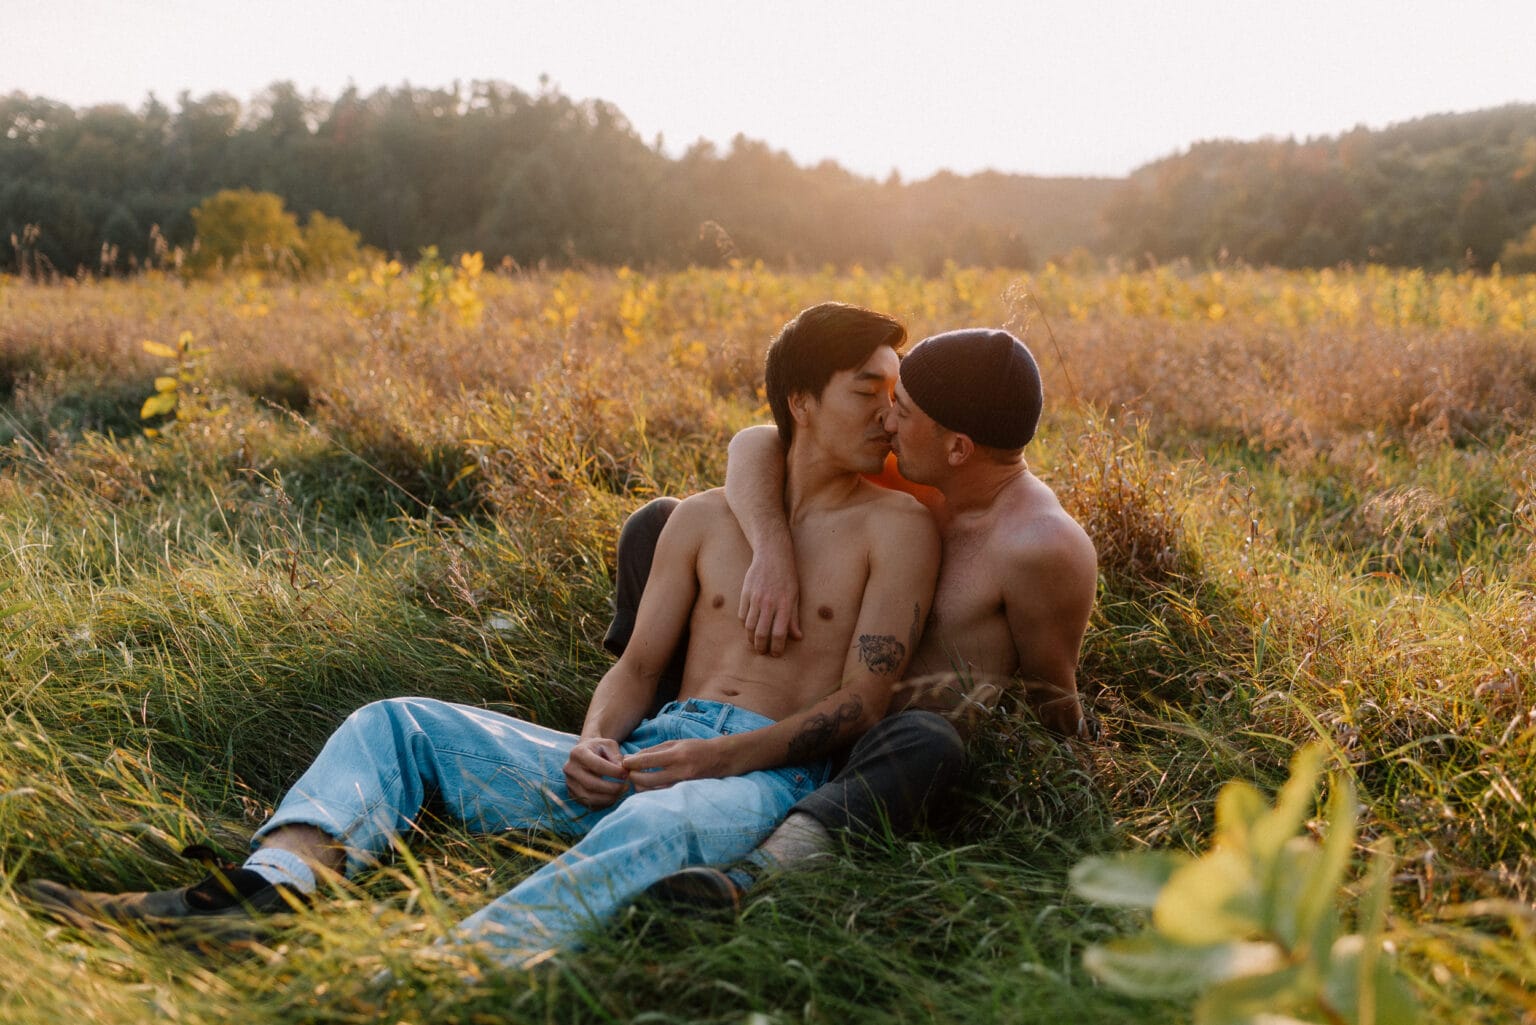 Gay couple siting in a field at sunset kissing each other.